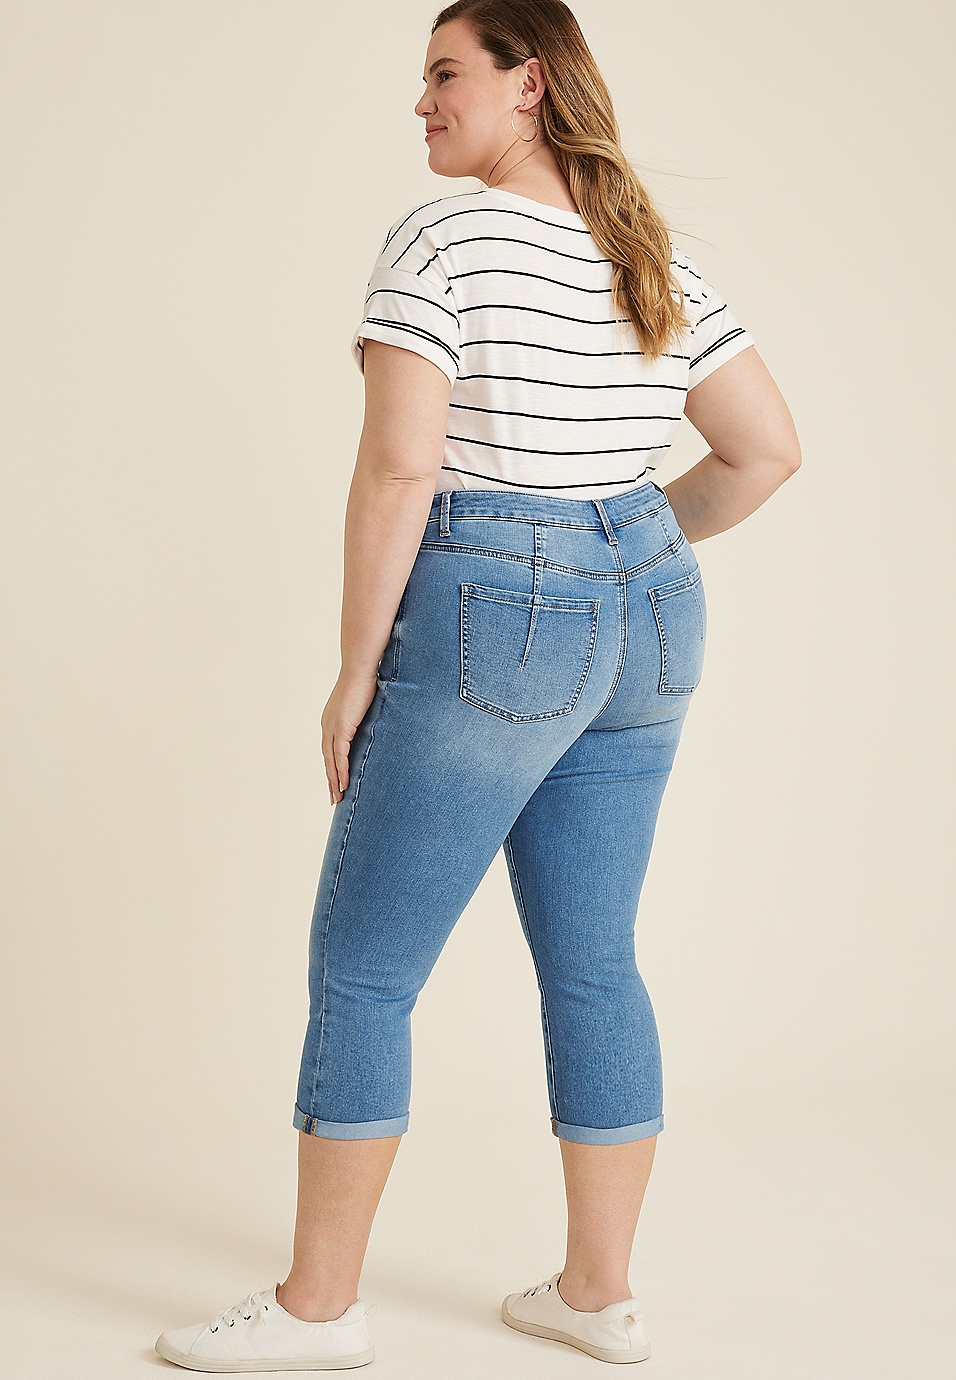 Plus Size m jeans by maurices™ High Rise Super Skinny Jean